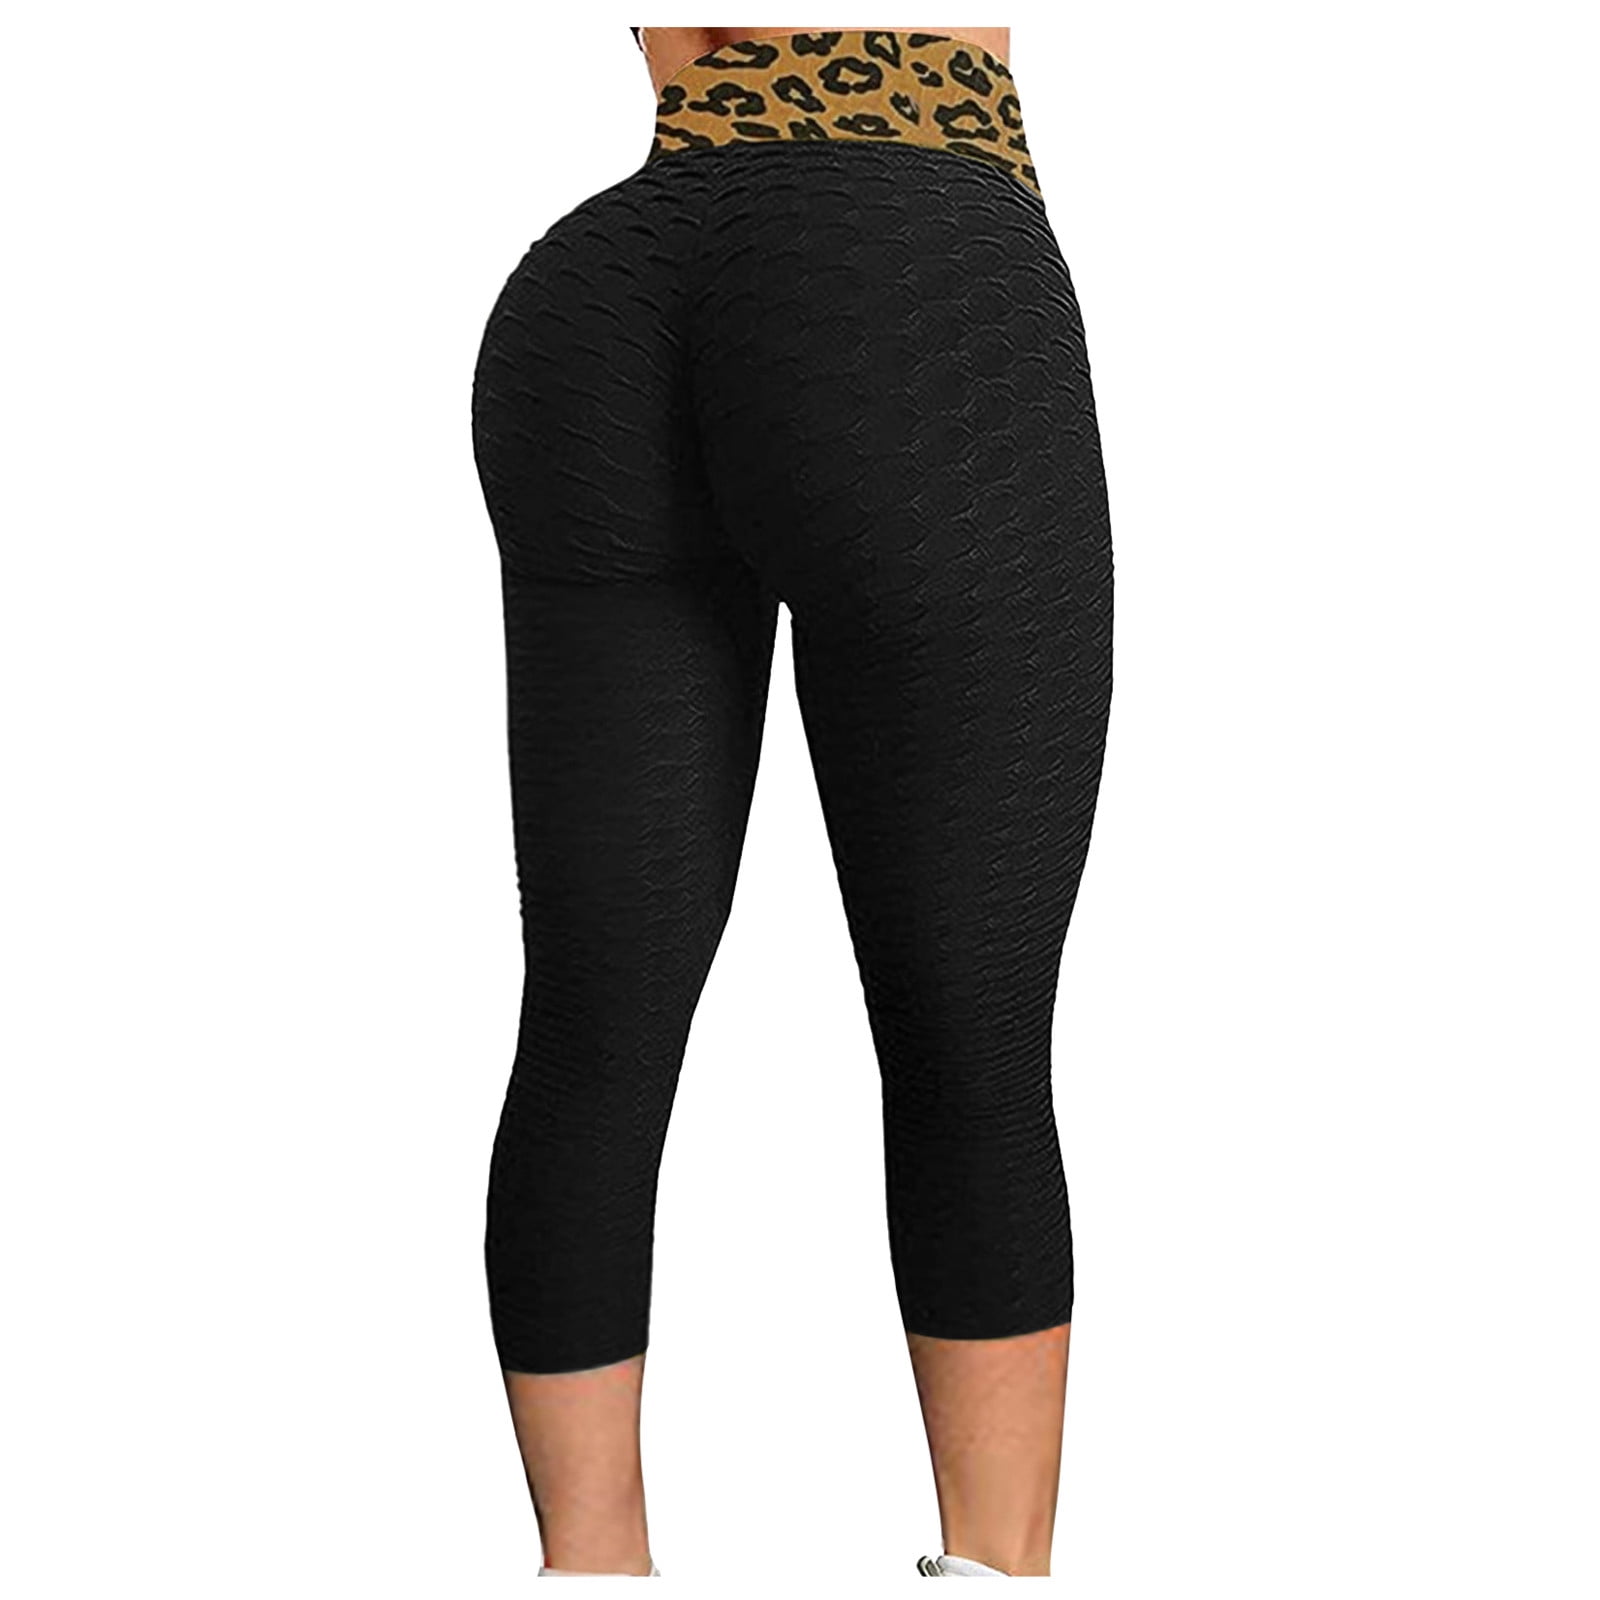 Yoga Pants For Women With Pockets Trendy Women Printed Yoga Pants Sport  High Waisted Leggings Workout Pants Je4756 